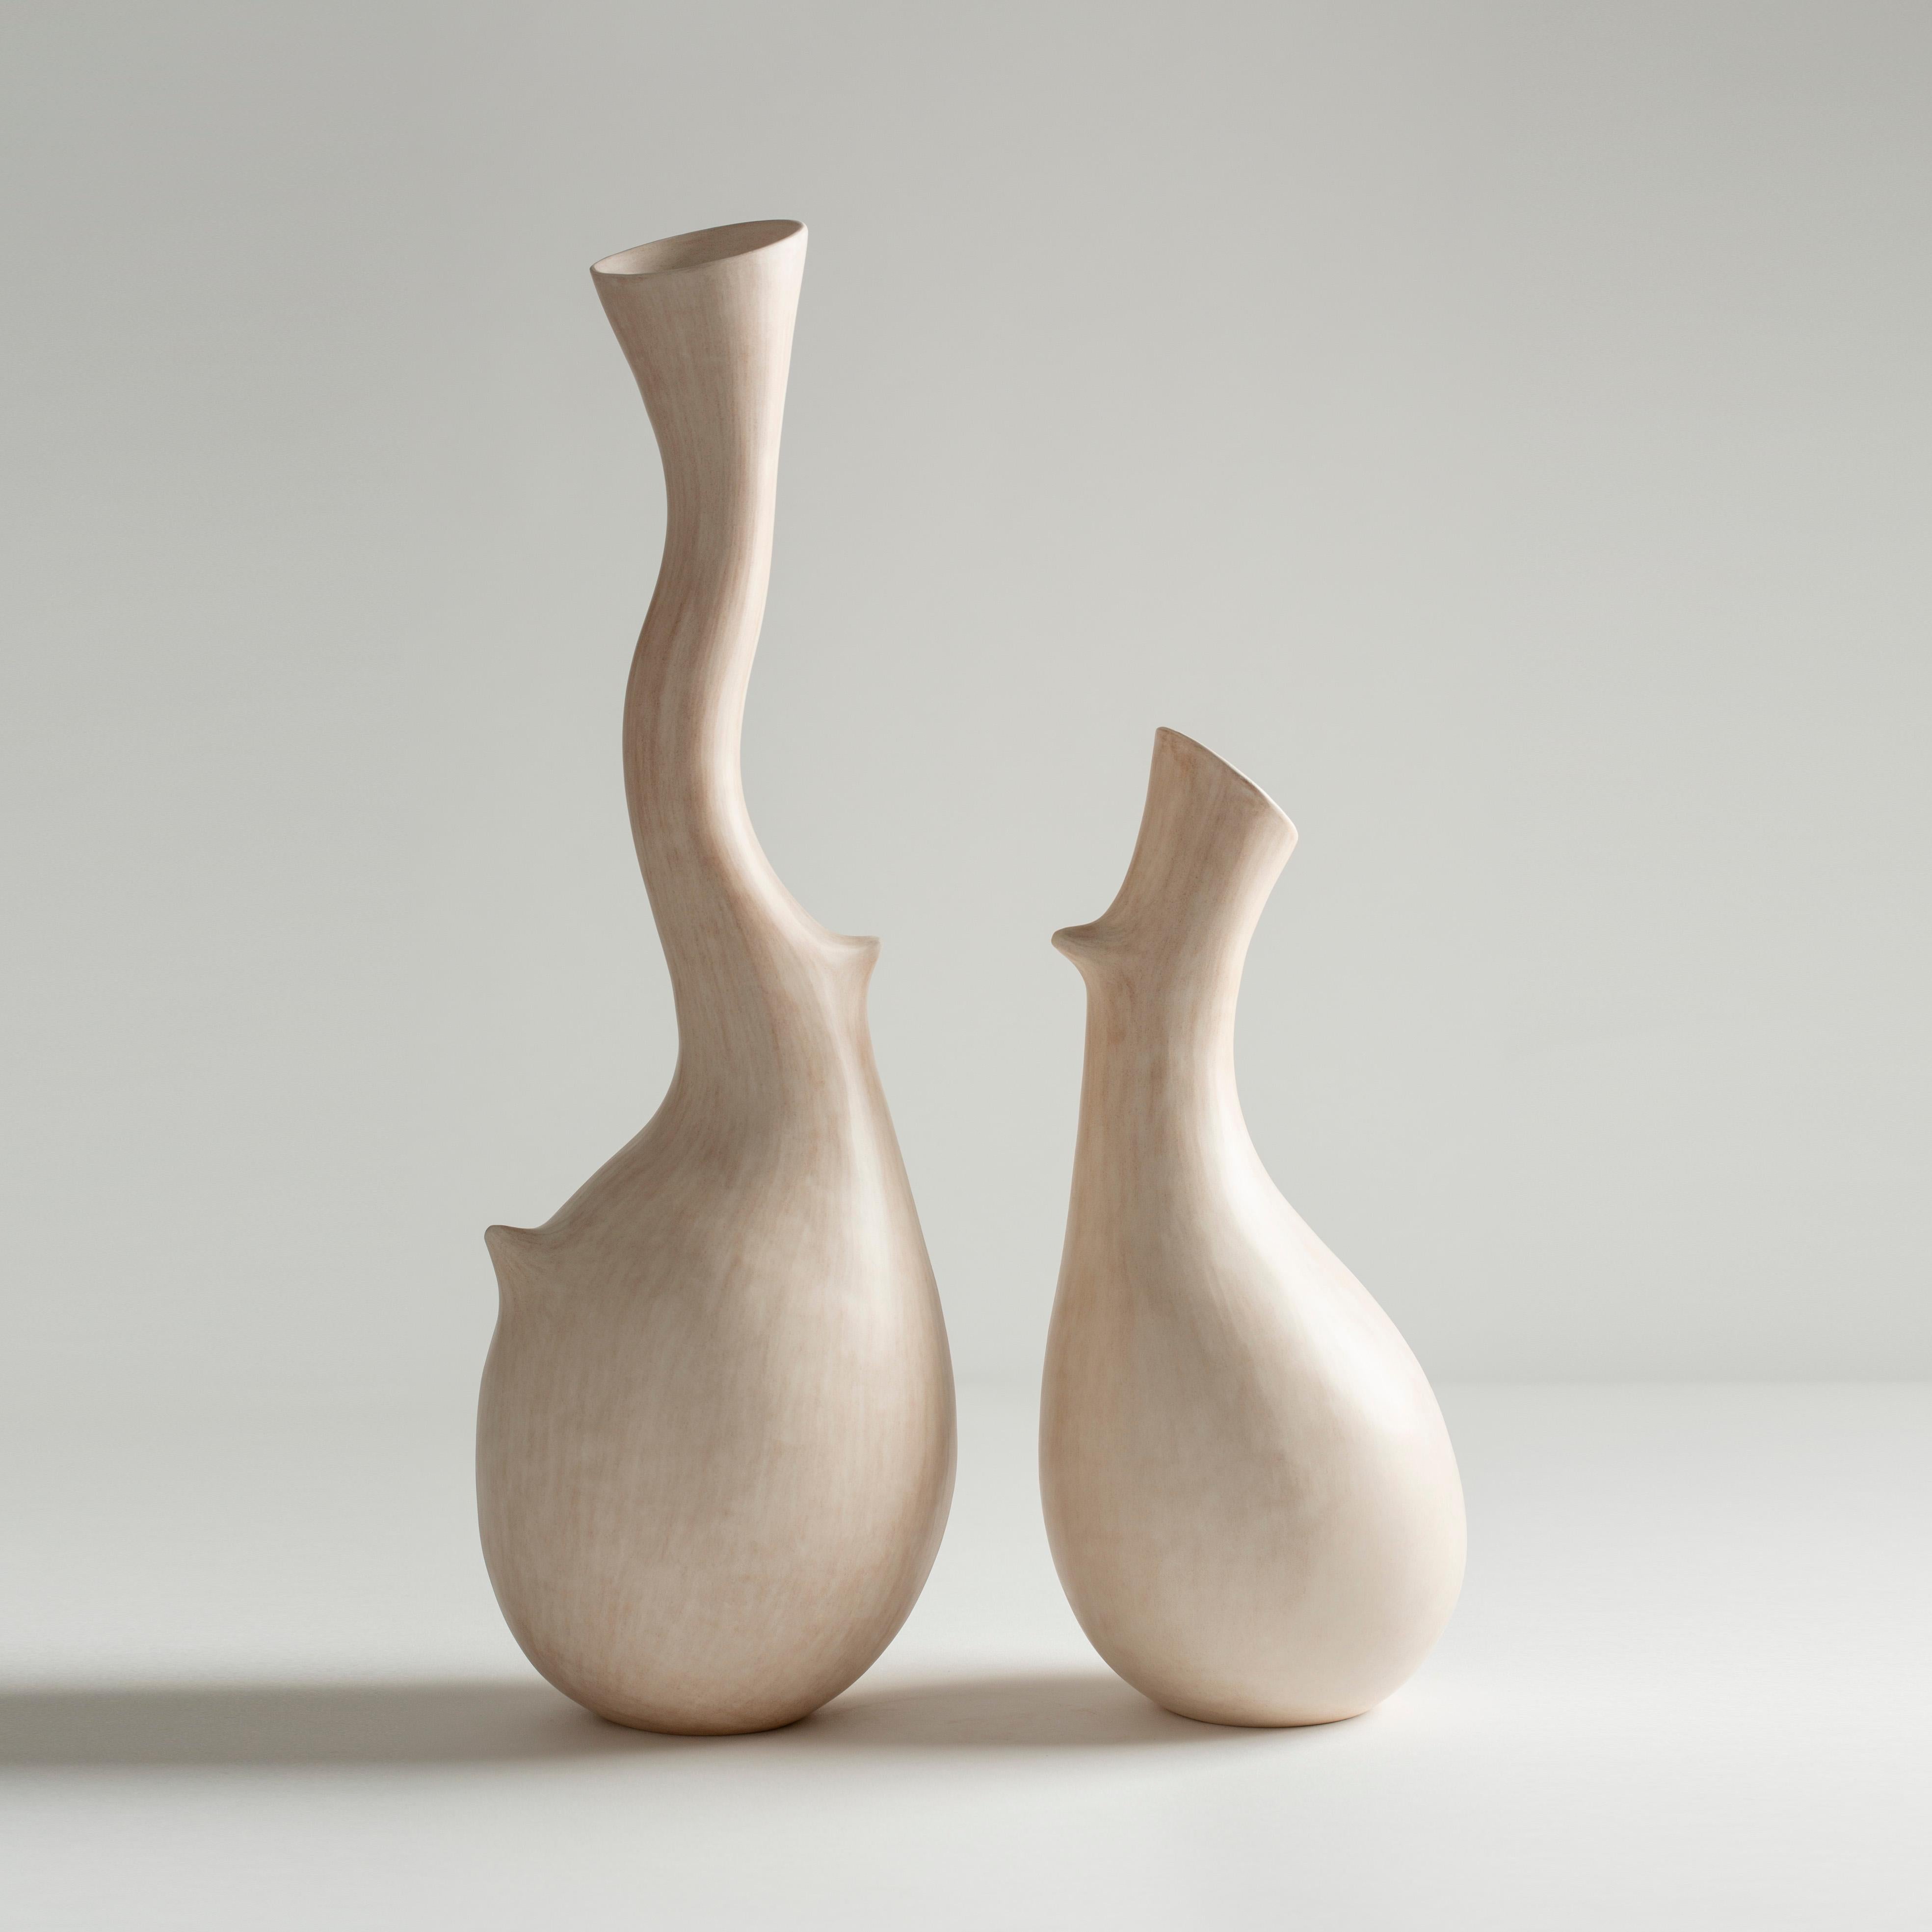 Thorns, 2020 (Ceramic, C. 11.25 in. h x 5 in. w and 17 in. h x 5.5 in. w, Object No.: 3930)

Tina Vlassopulos was born in London in 1954. After graduating from Bristol Polytechnic in 1977, she returned to London to set up her studio.

Although the